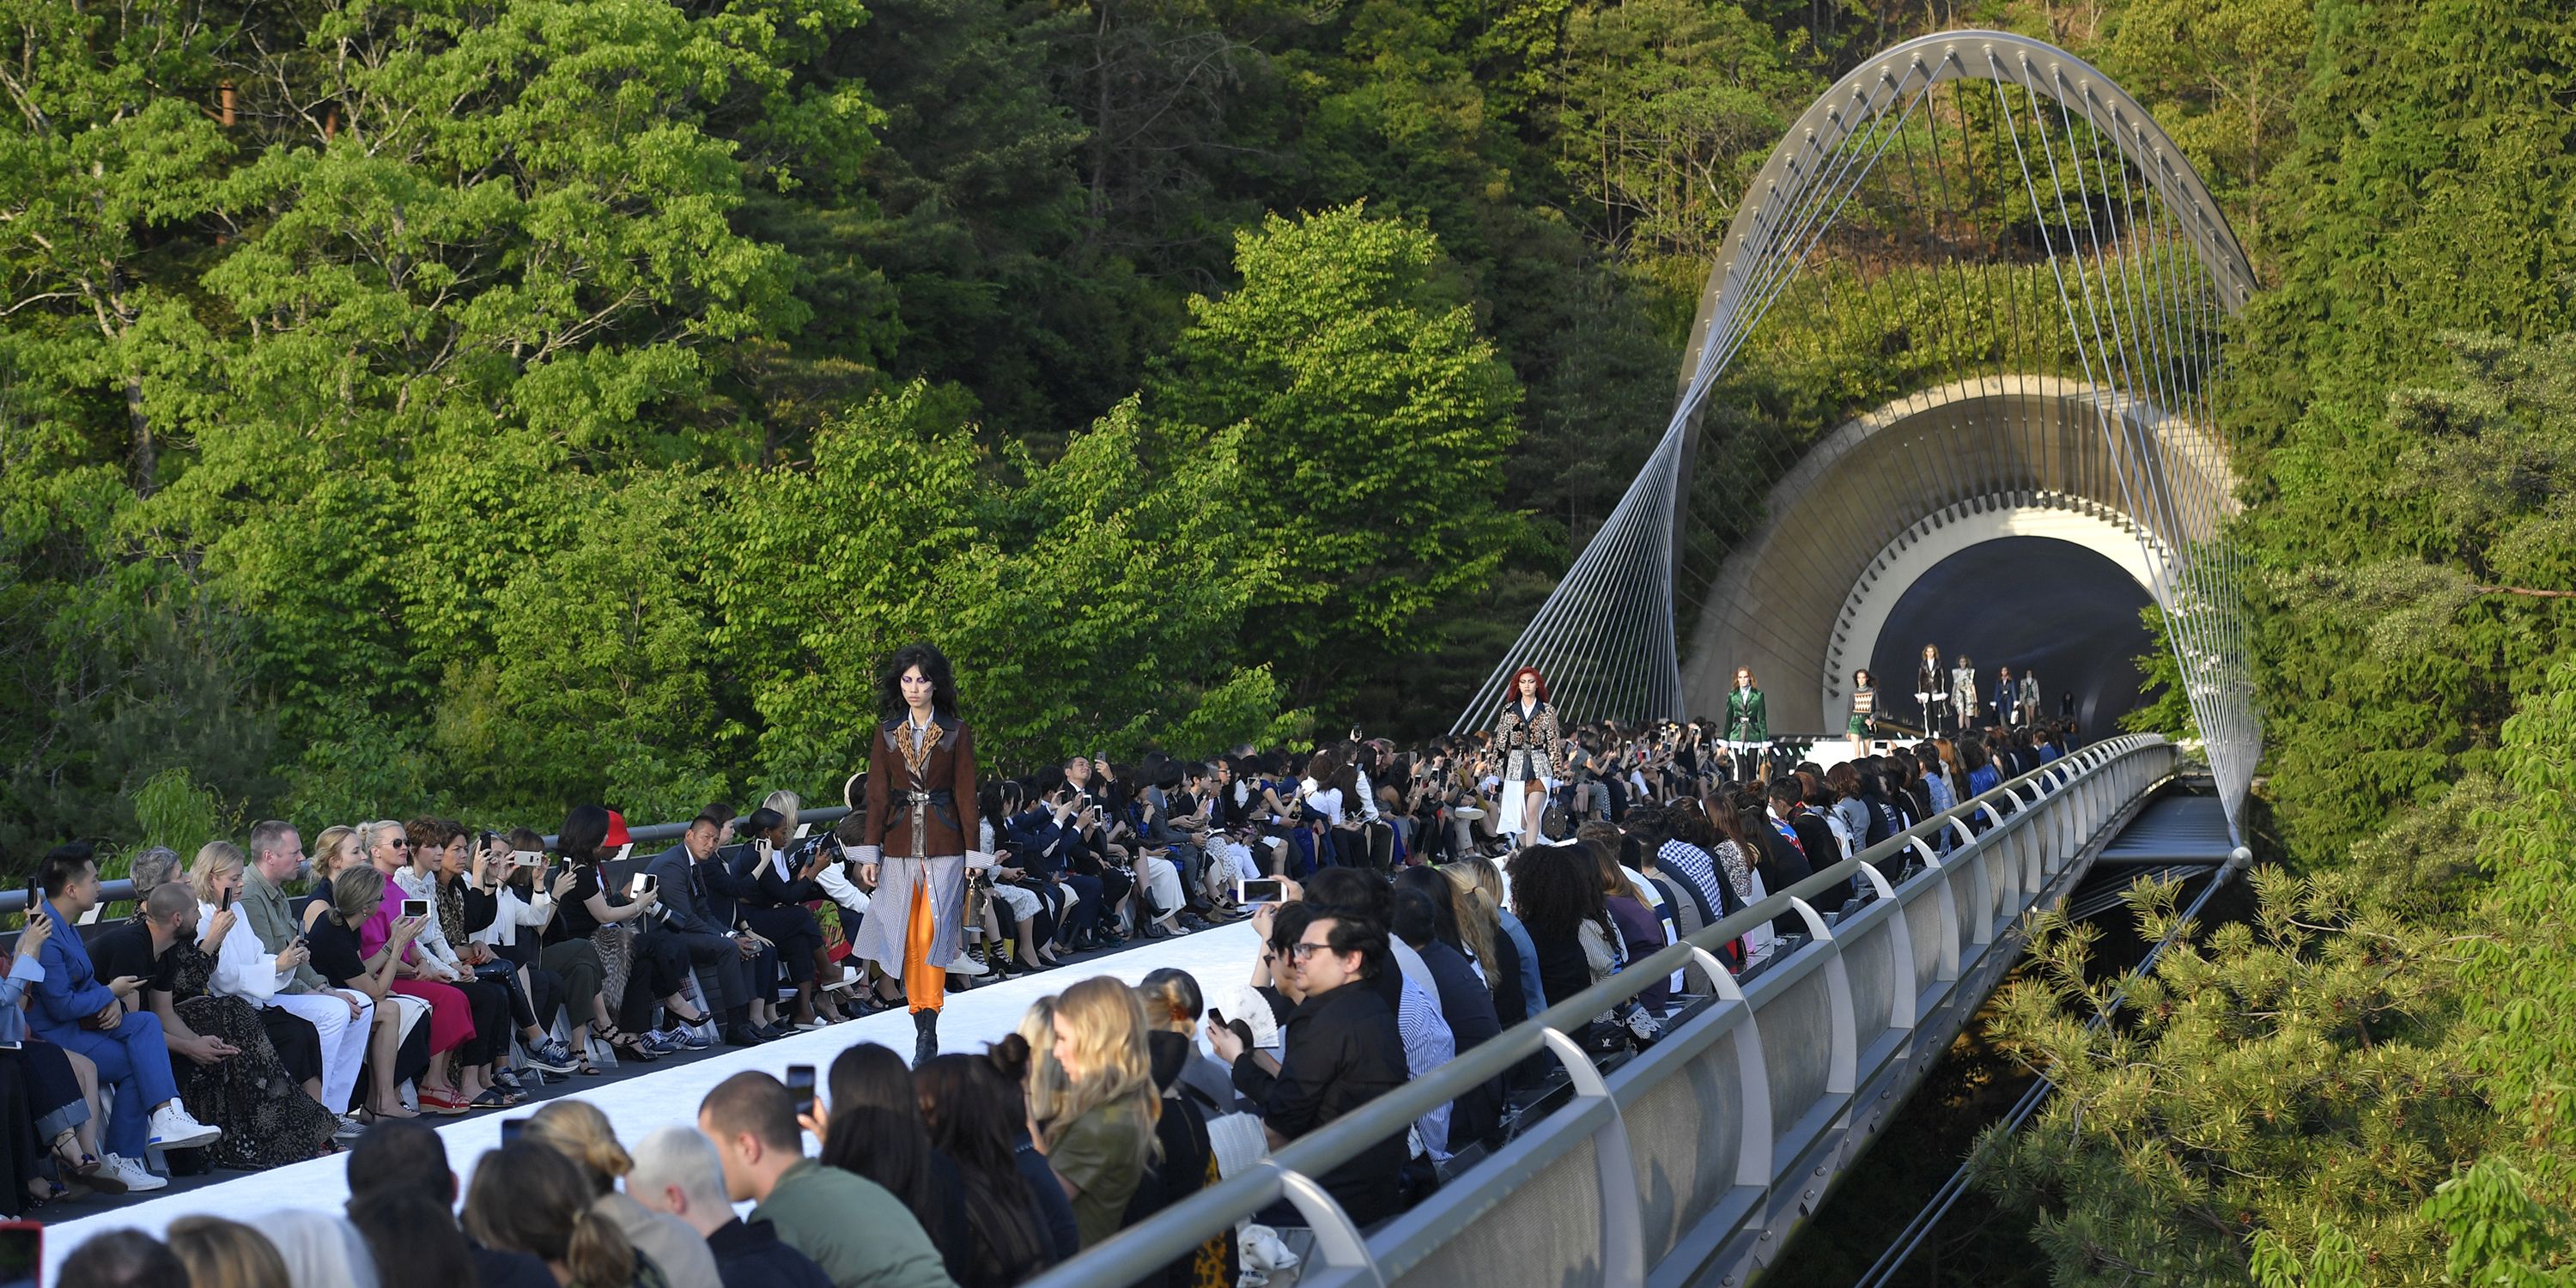 Louis Vuitton Cruise 2018 Show in Kyoto, Japan: Celebrity Pictures